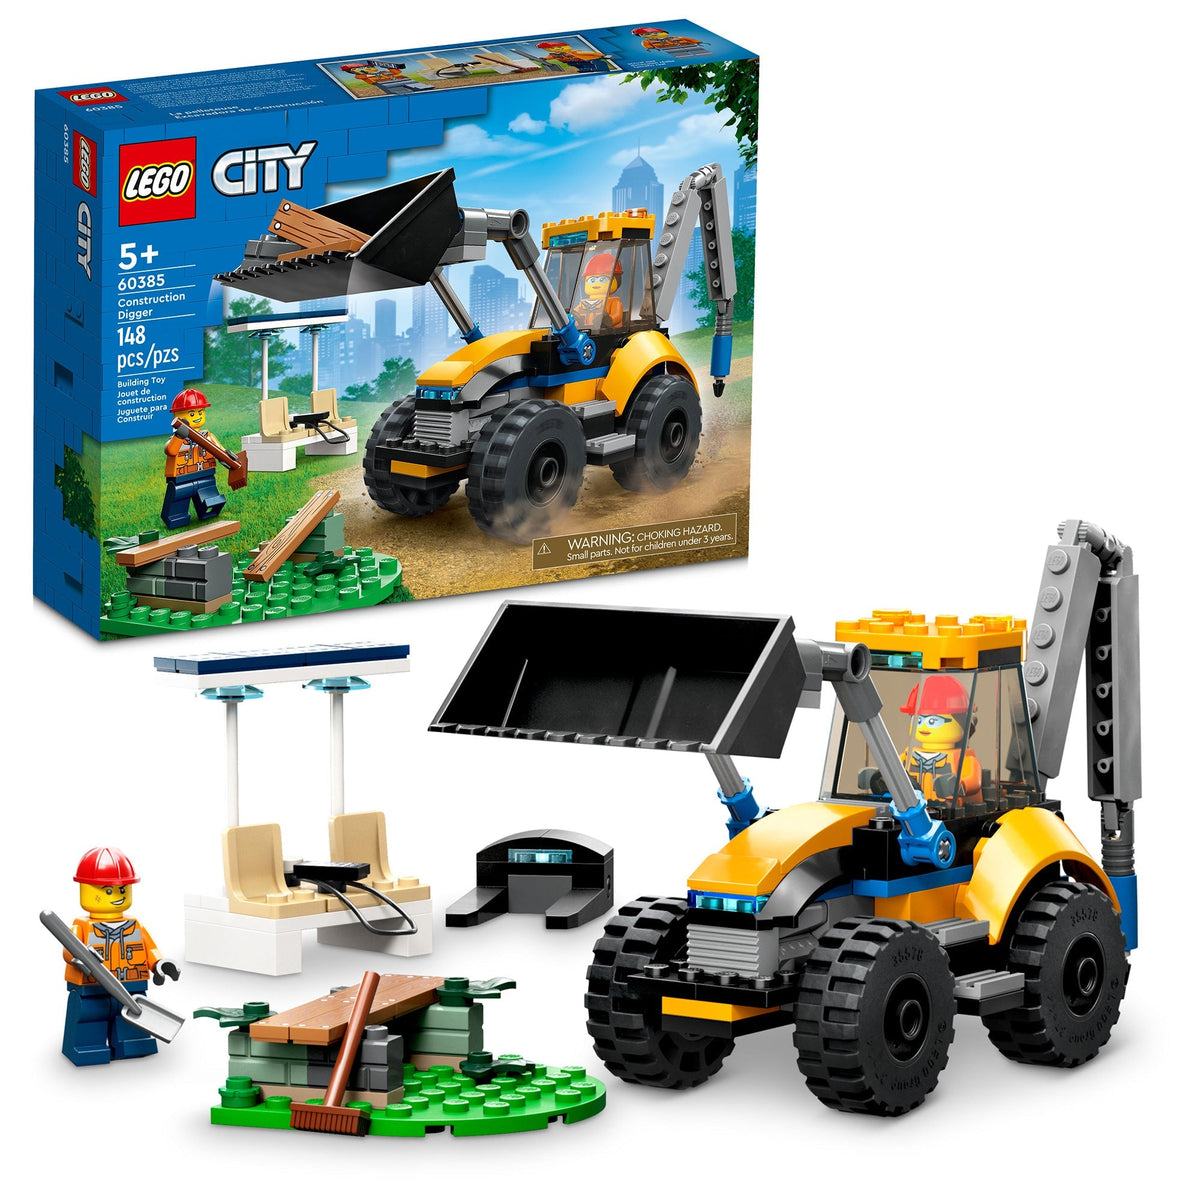 LEGO Toys & Games LEGO City Construction Digger, 60385, Ages 5+, 148 Pieces 673419375177